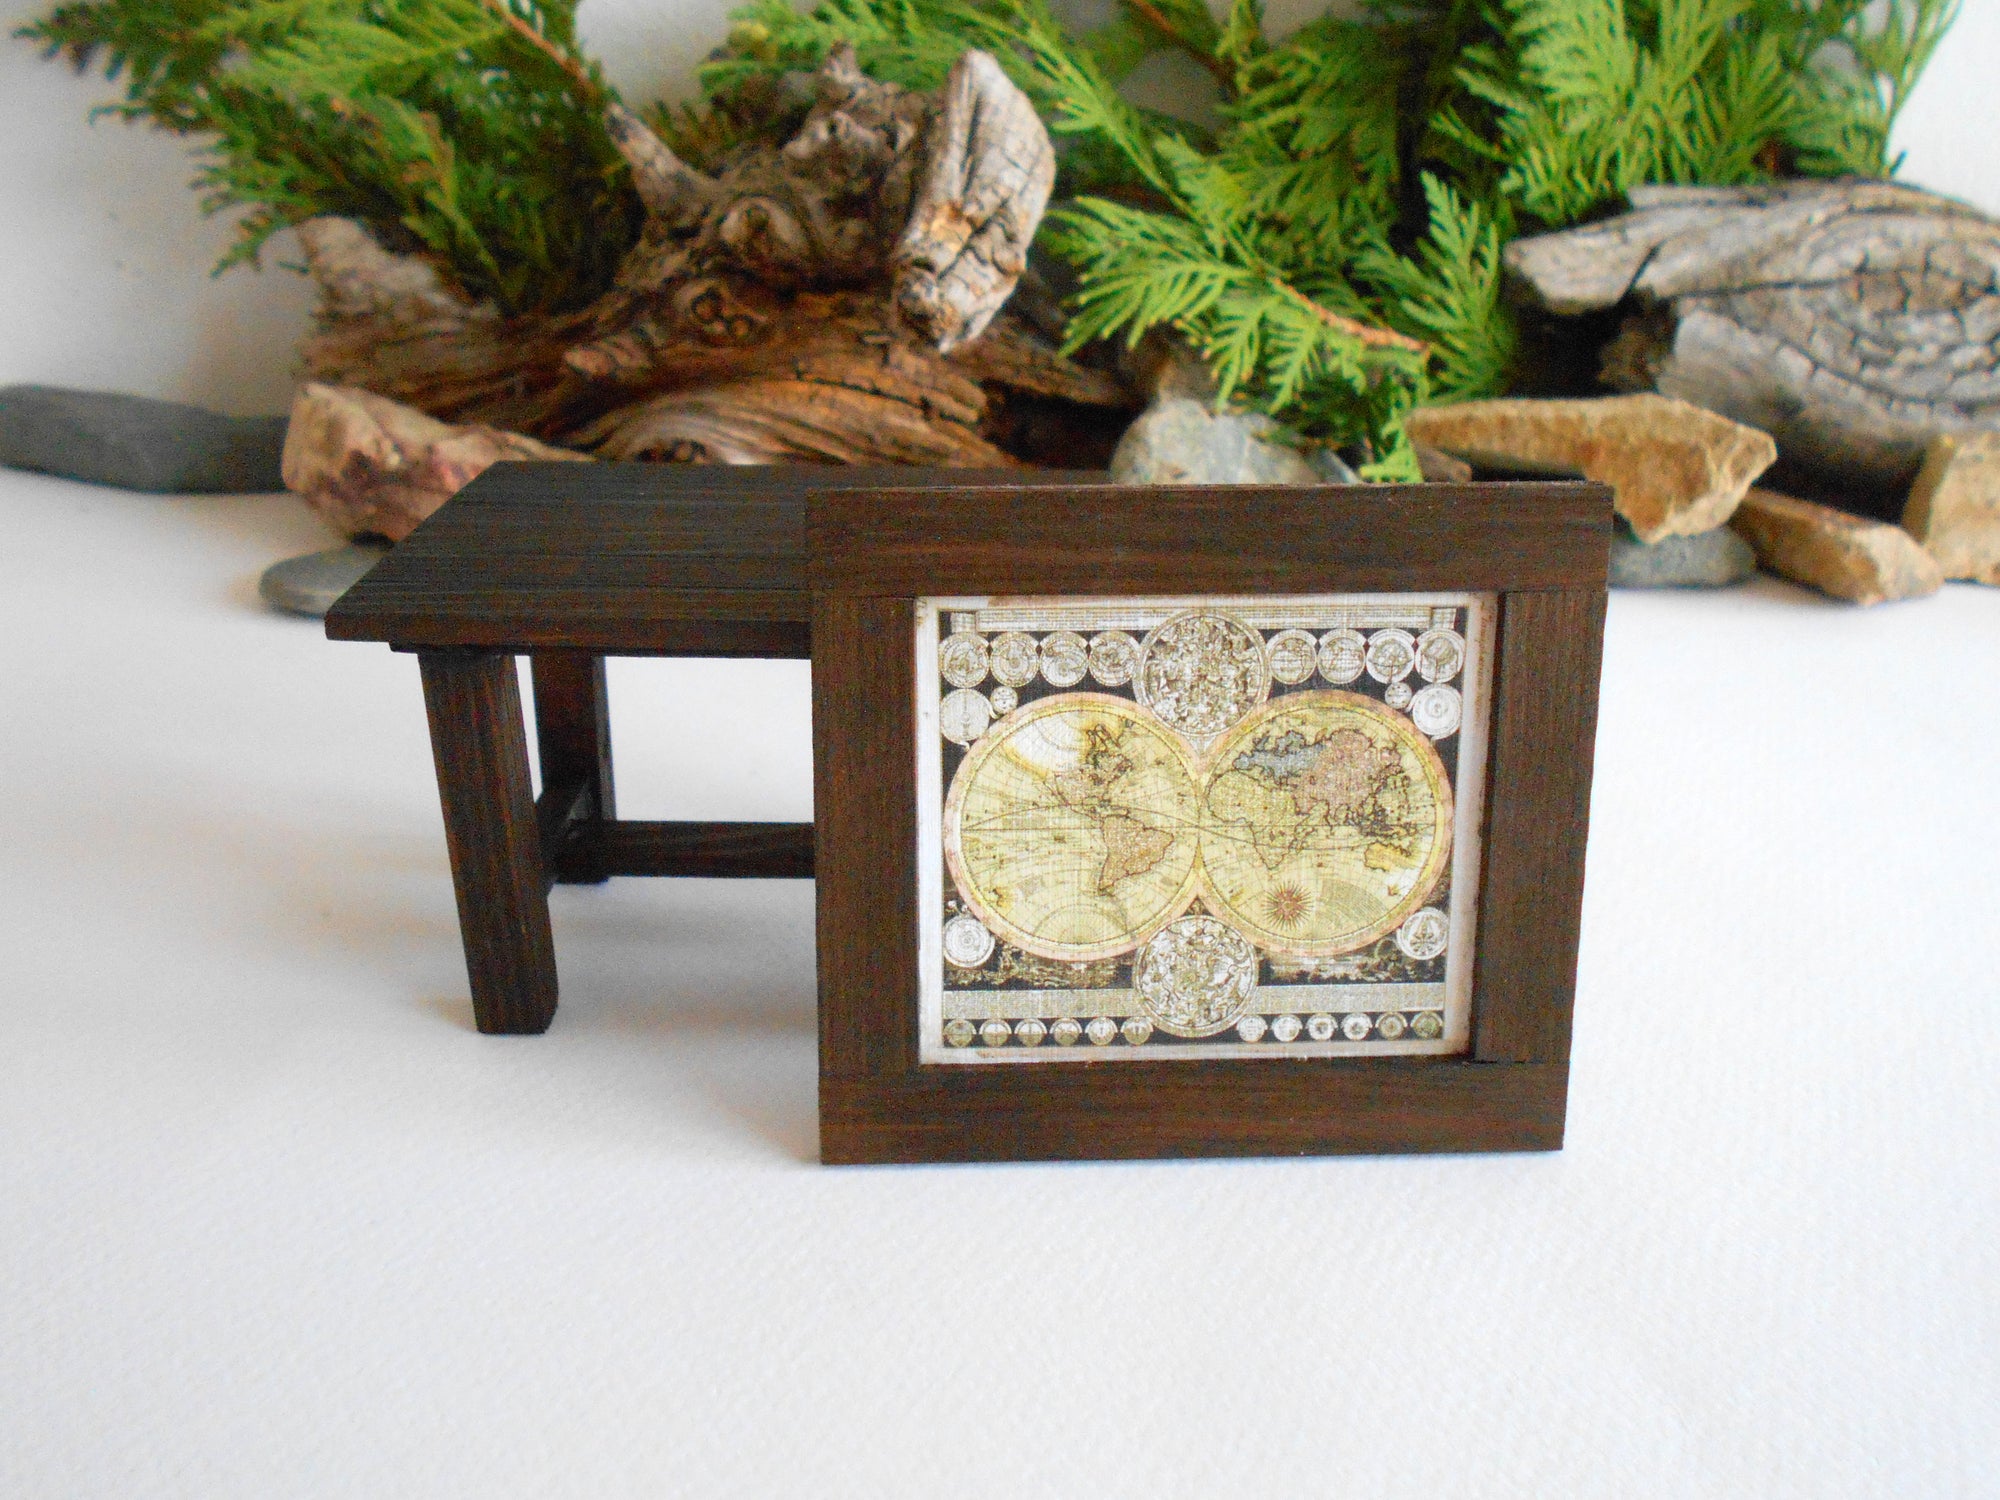 Miniature world map framed with real pinewood- mini map artwork for dollhouse or for miniature collectors- handmade miniature dollhouse furniture wall decor accessory